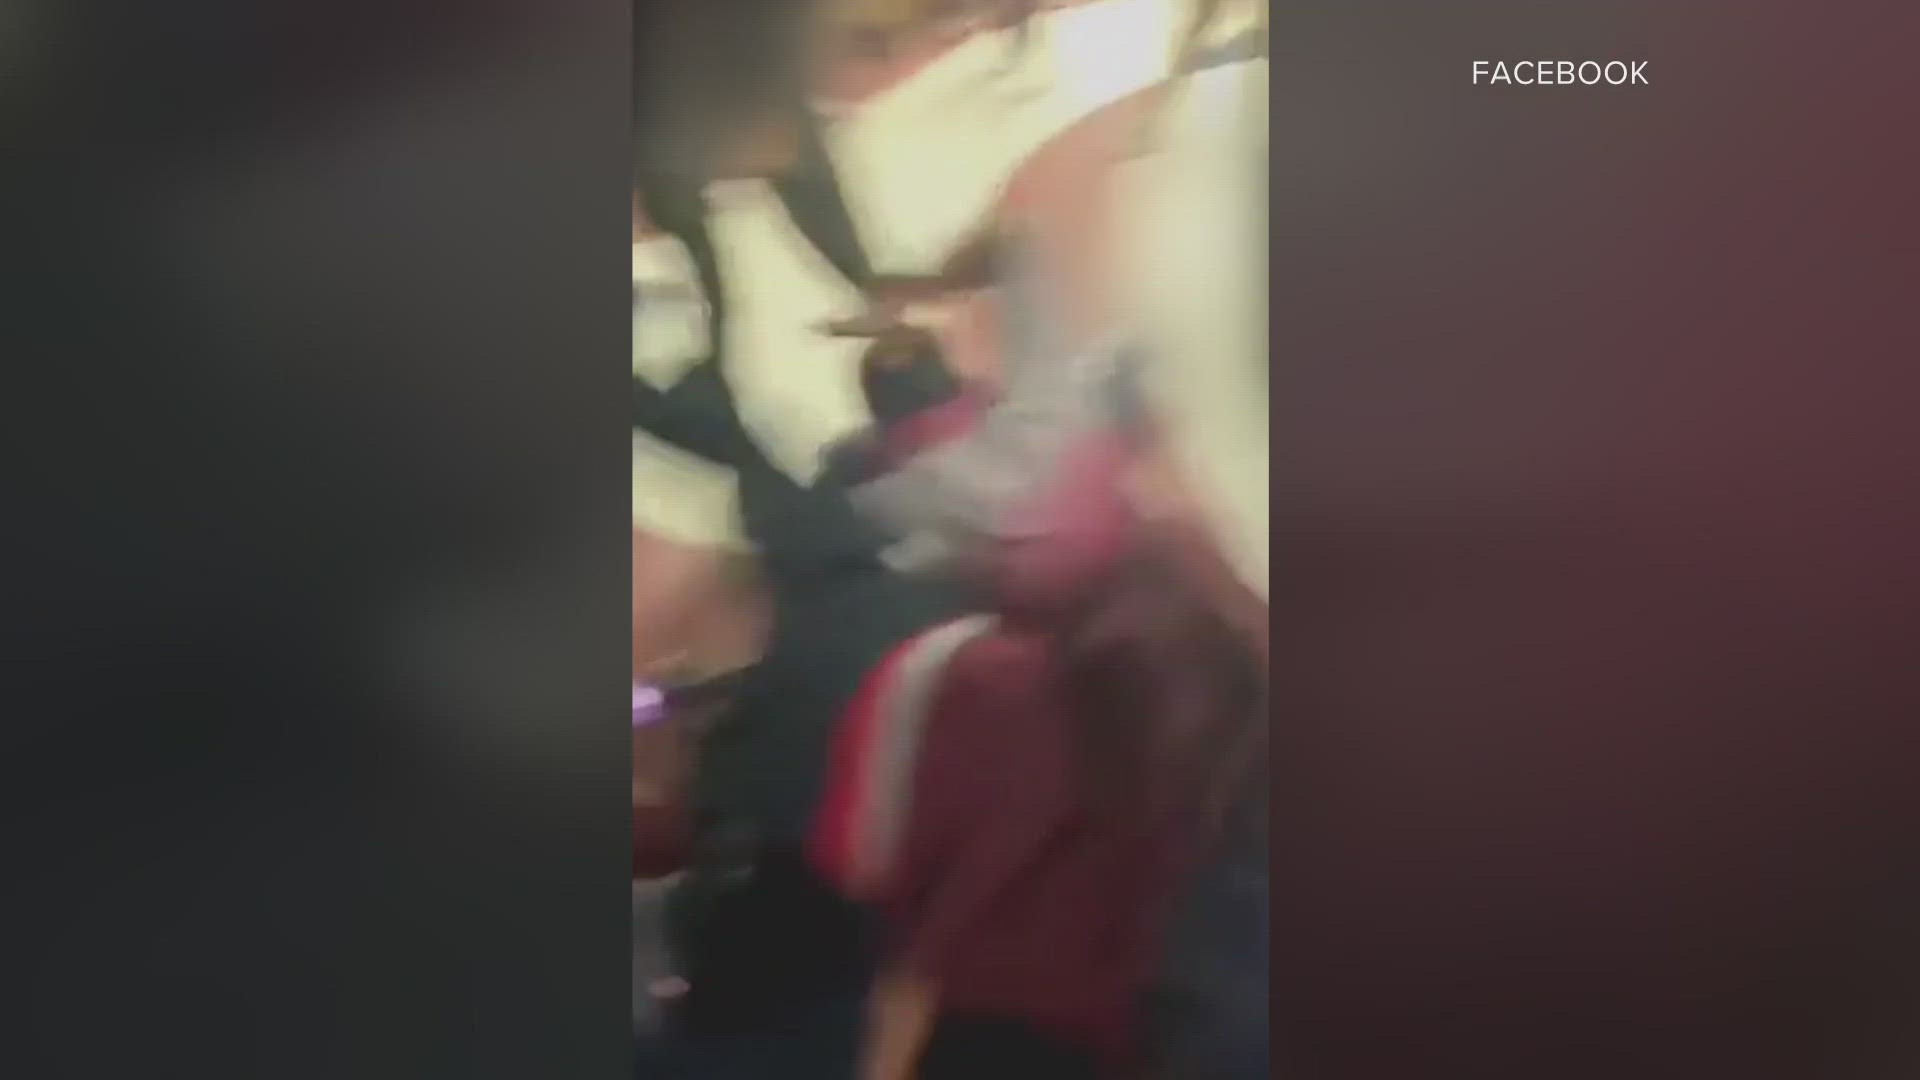 A brawl at Chalmette High was caught on video and it showed at least a half dozen students involved and a resource officer use a TASER.